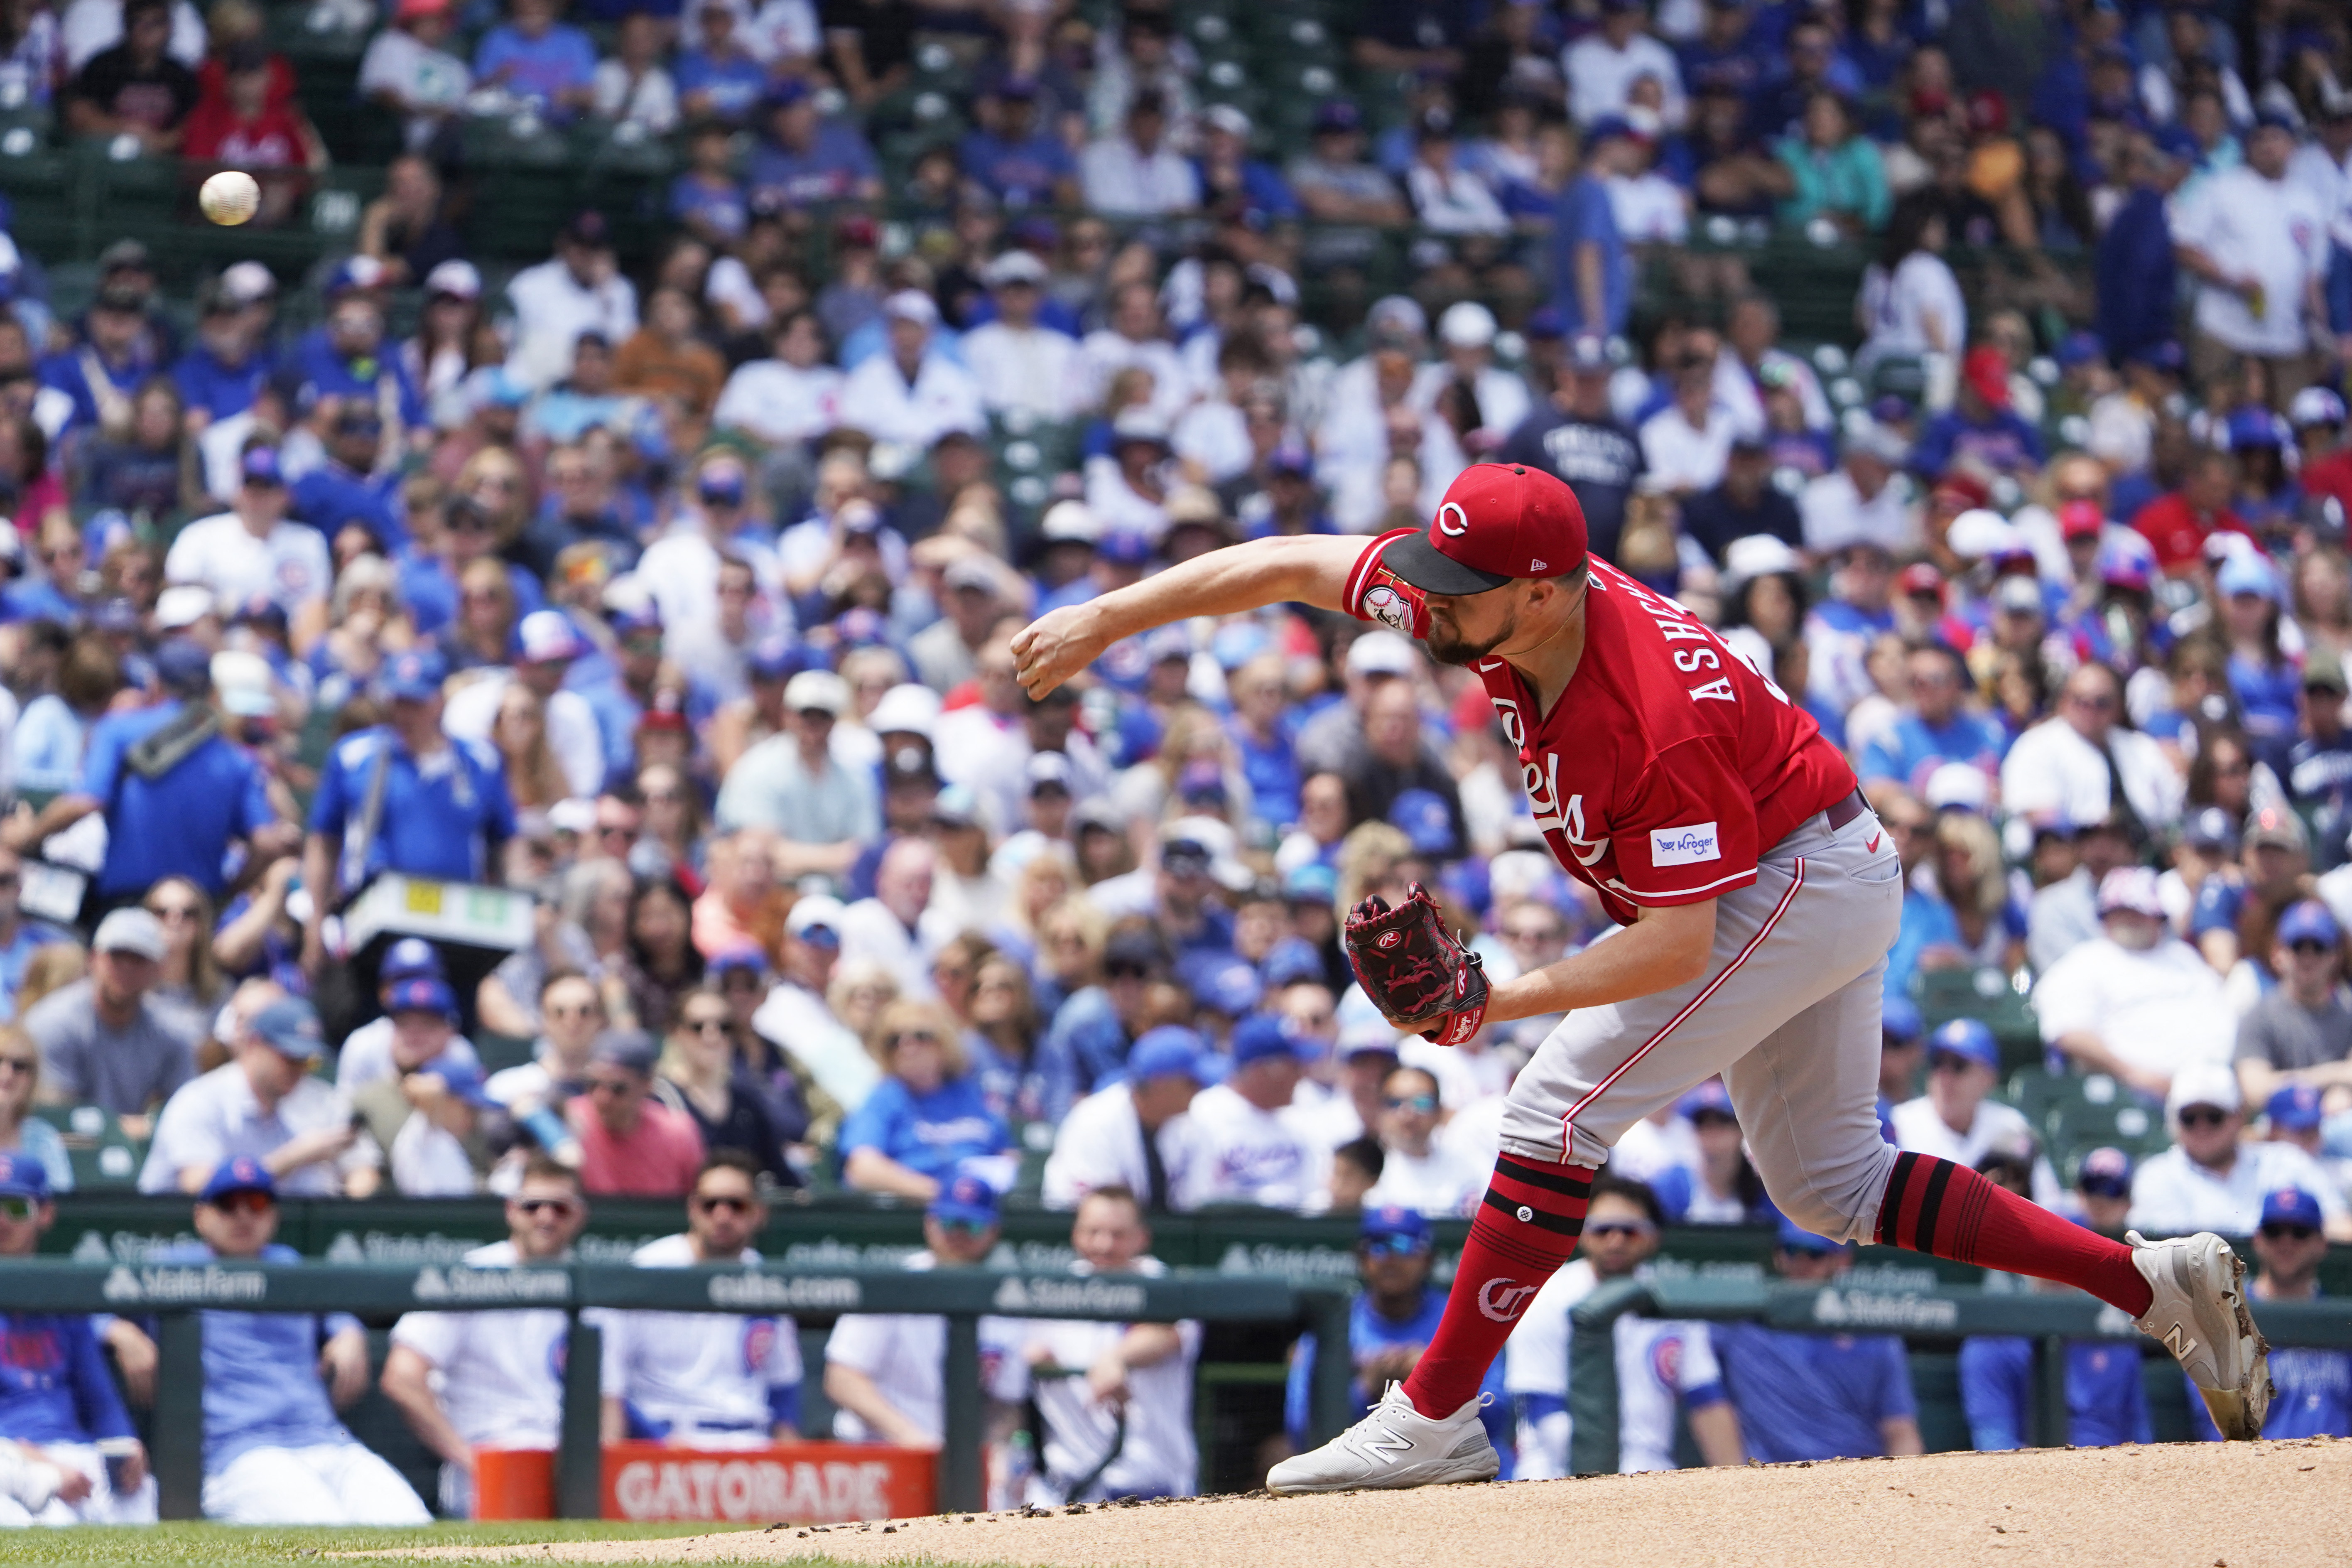 Hot-hitting rookie McLain, Steer lead Reds past Cubs 8-5